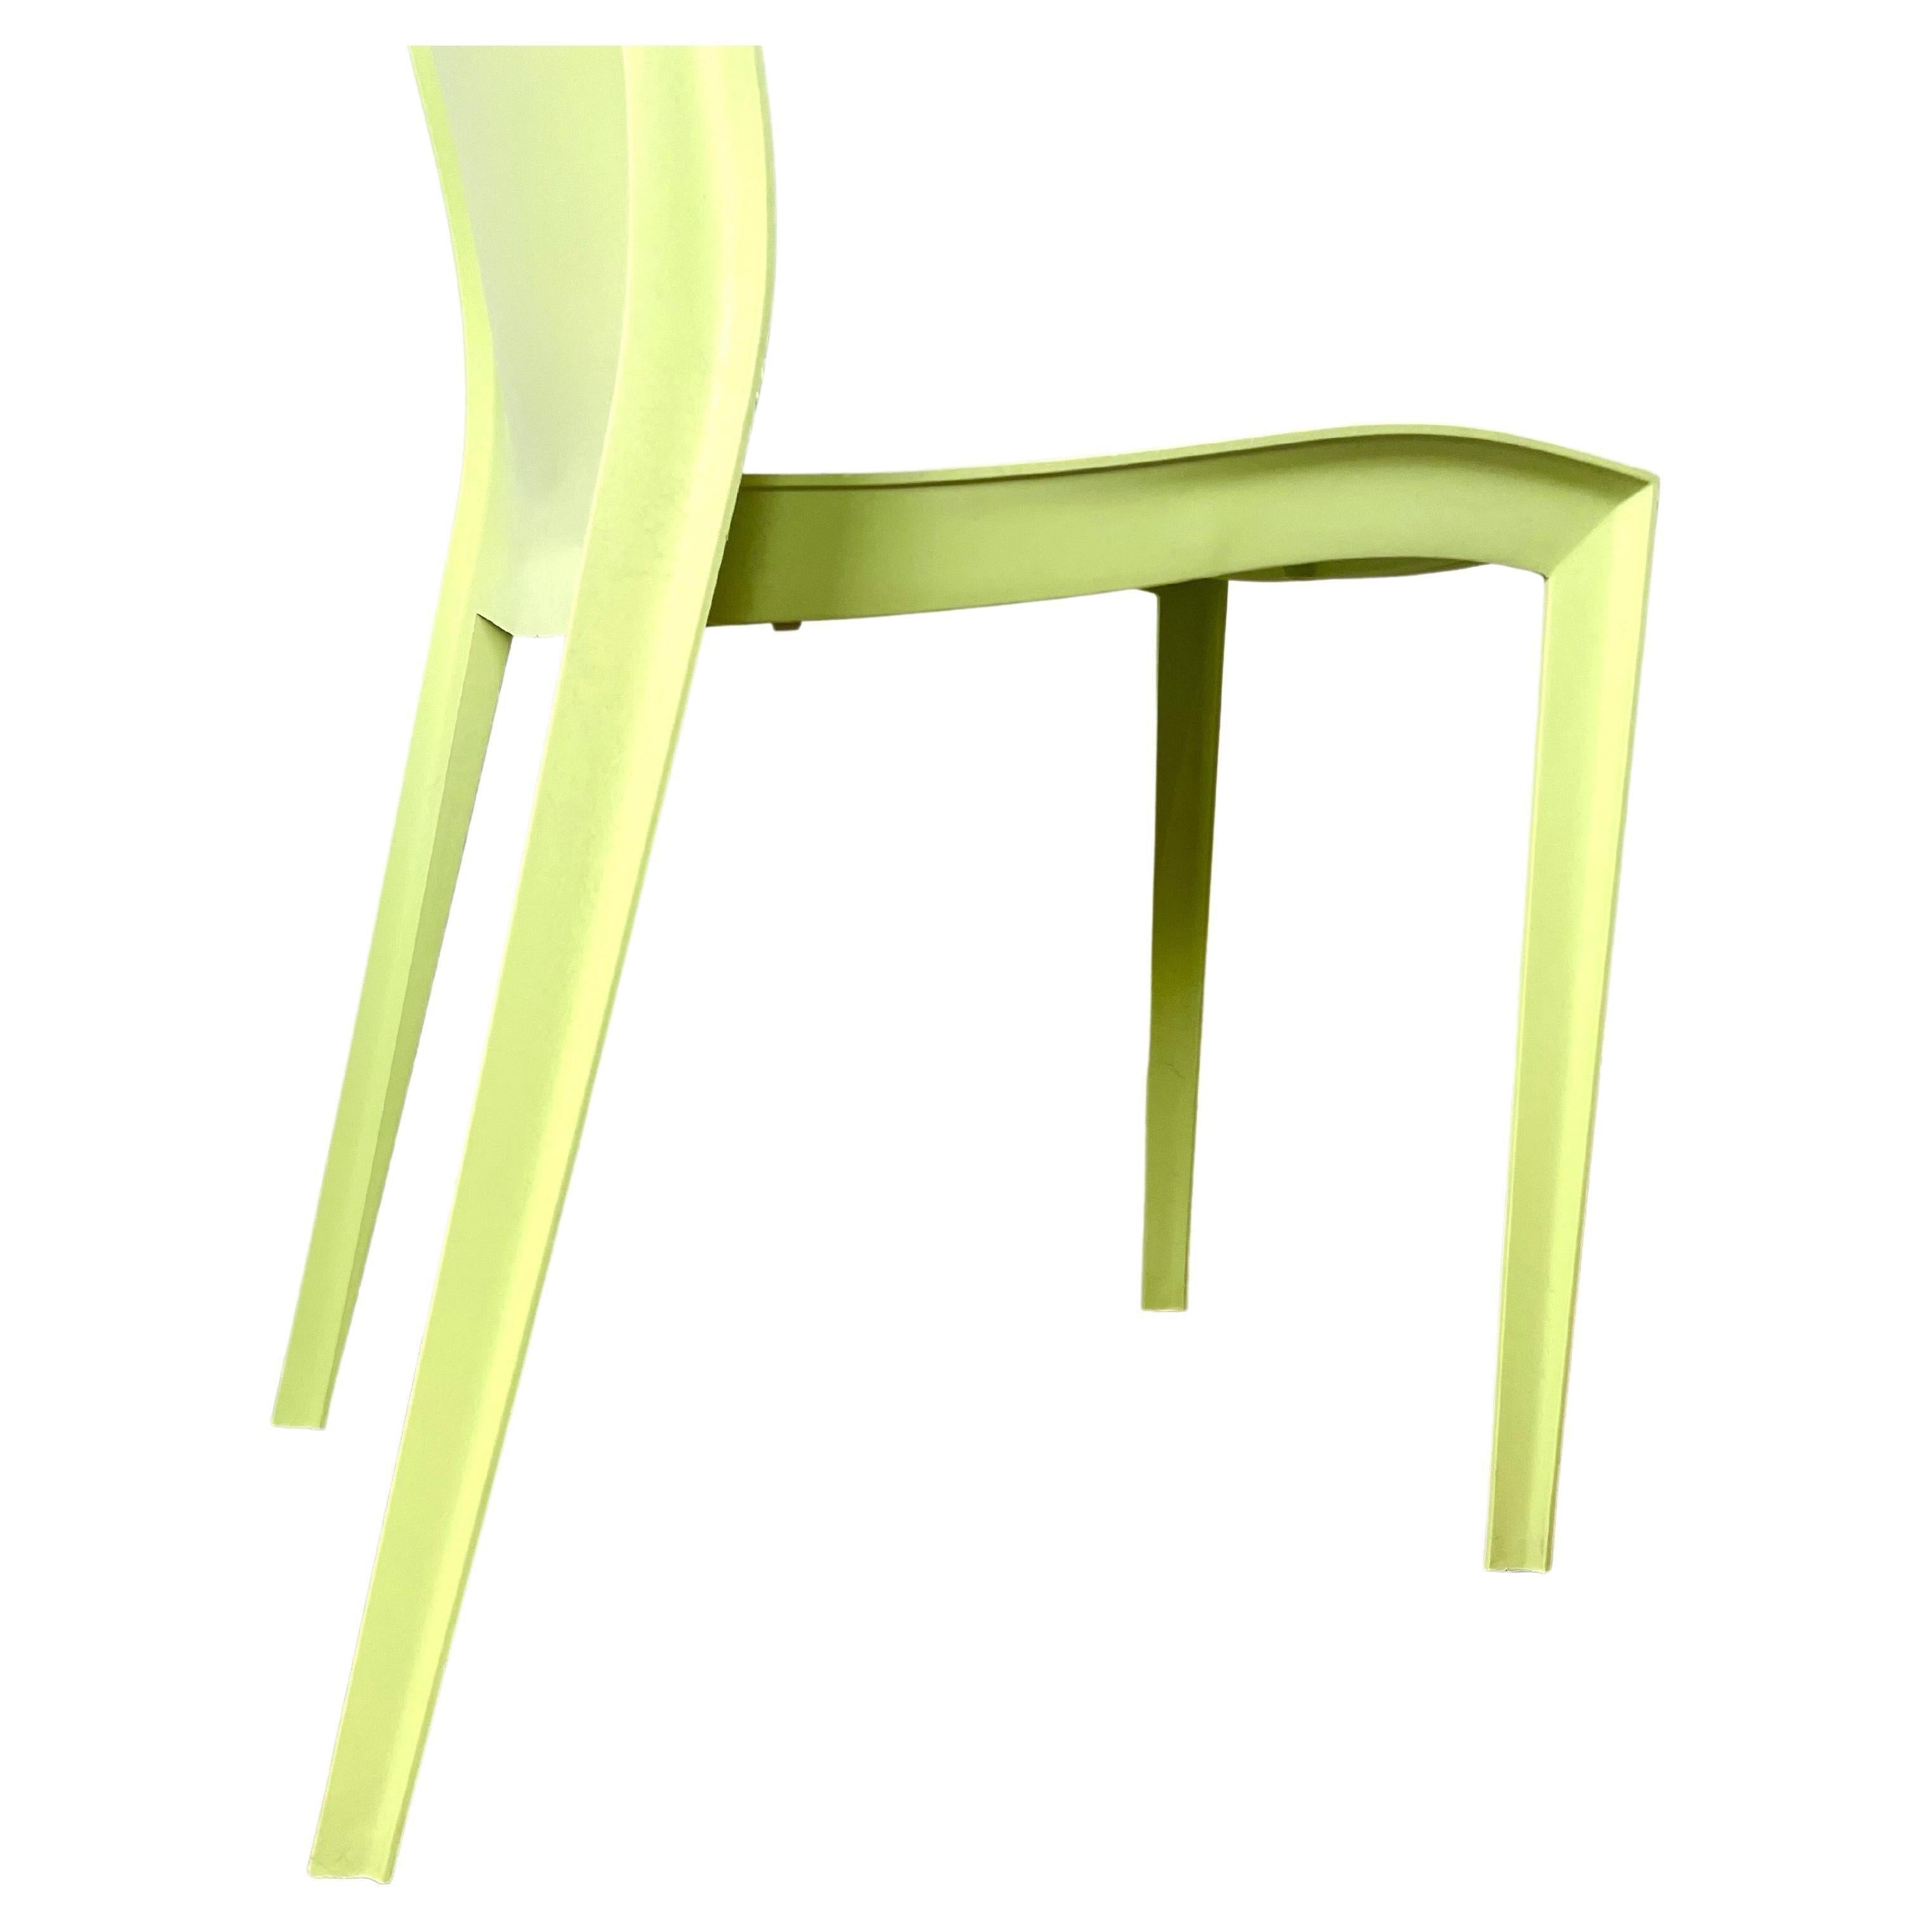 Plastic Philippe Starck, Set of 2 French Green Chairs, Design Slick Slick XO - France For Sale